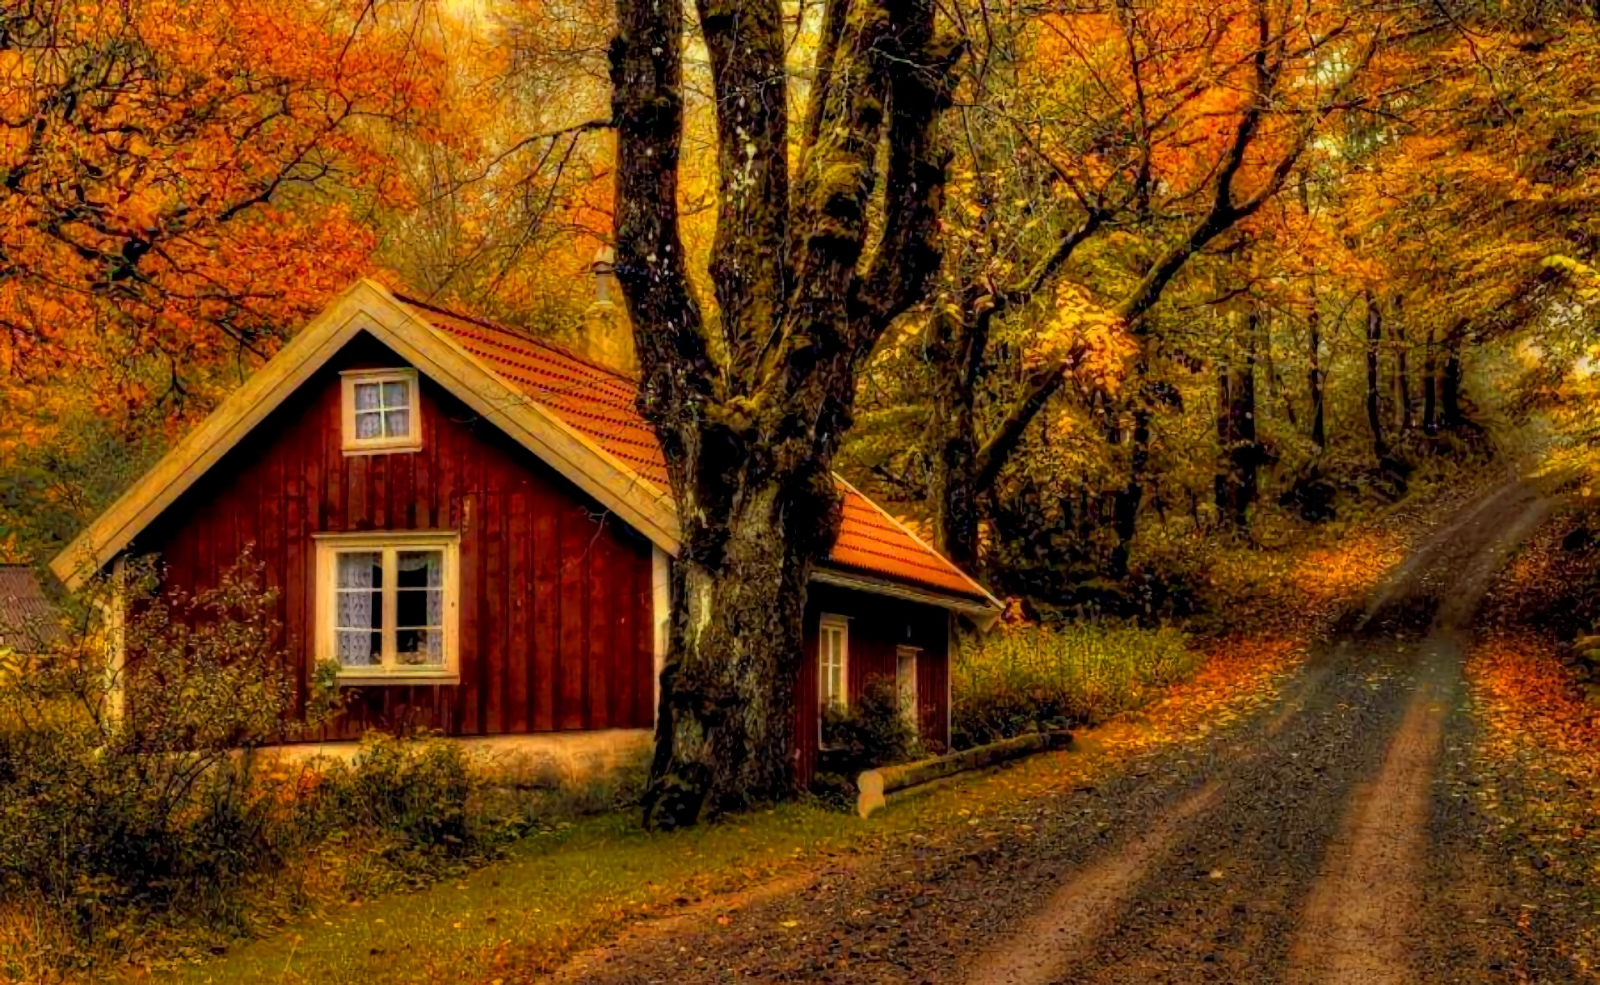 Download Forest Tree Dirt Road Road Fall Man Made House Wallpaper